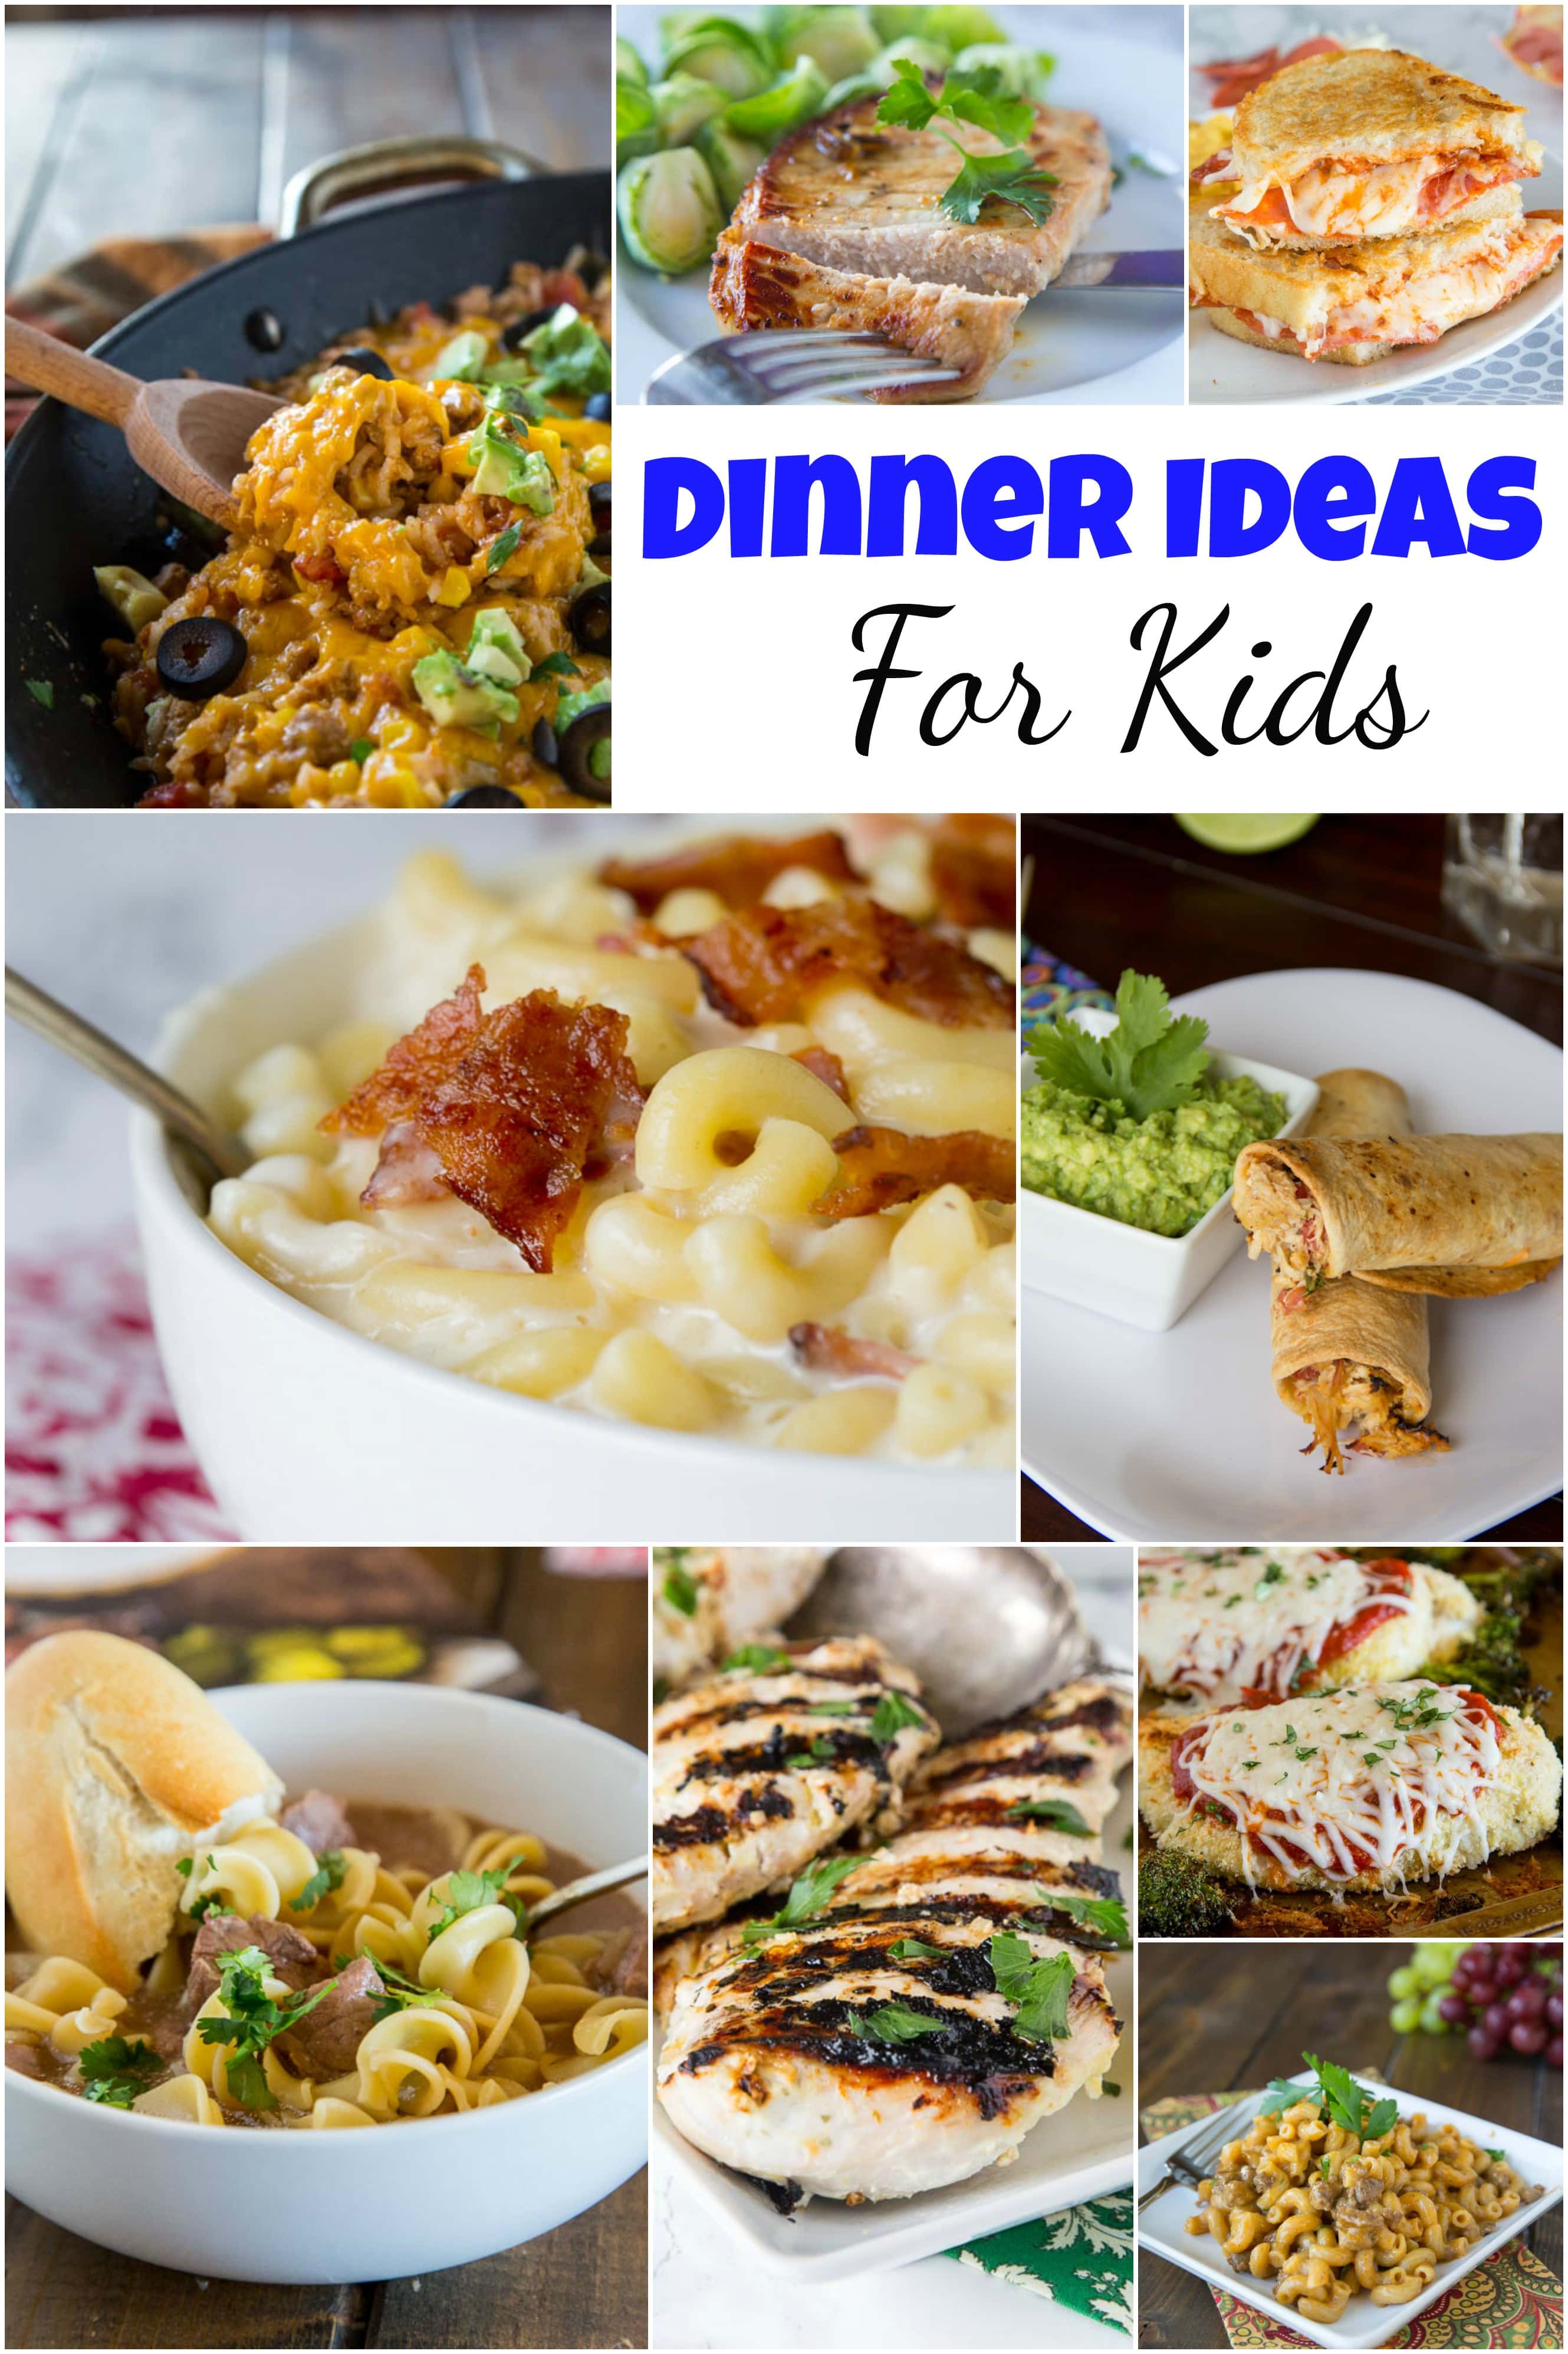 Dinner Ideas for Kids - do you have picky eaters in your house?  Well here are 25 dinners ideas for kids that are picky eater approved, and the grown ups will like them too!  Not just chicken nuggets and box mix mac and cheese that is for sure!